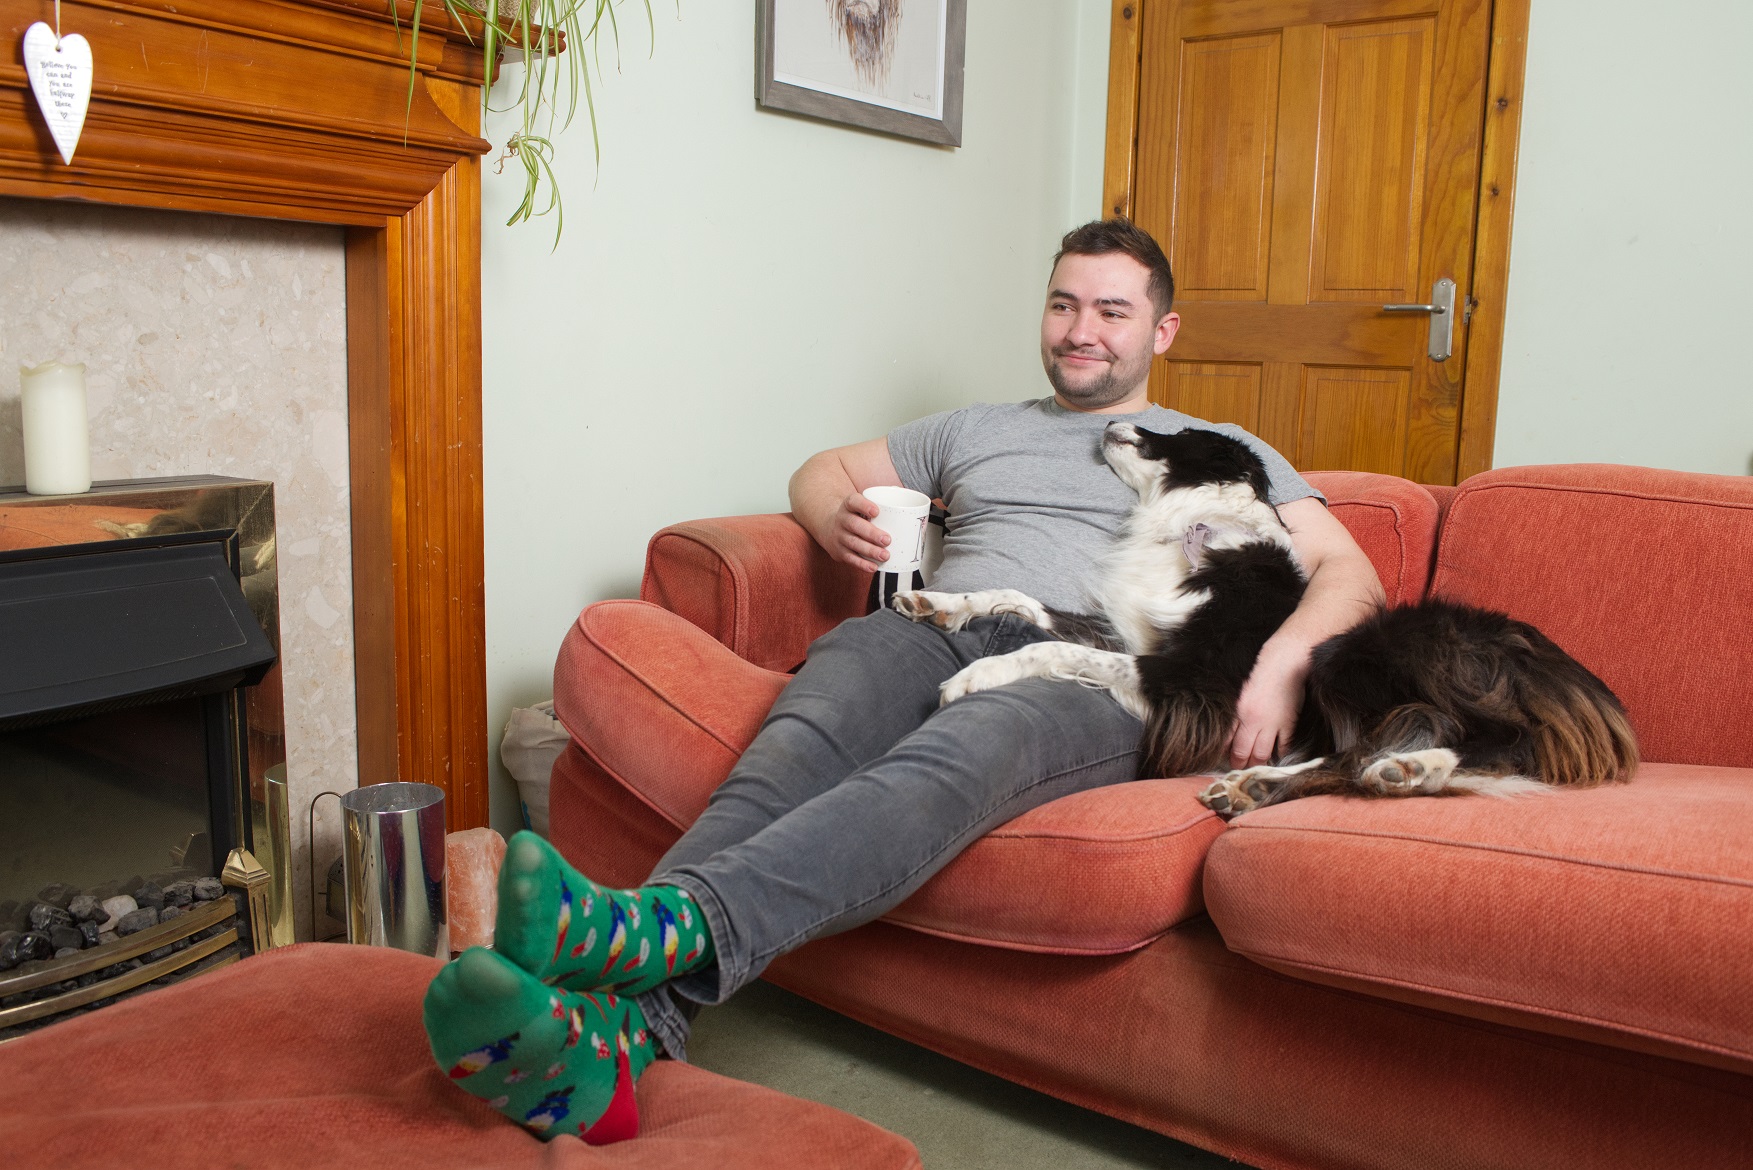 Customer relaxing in rented home with dog